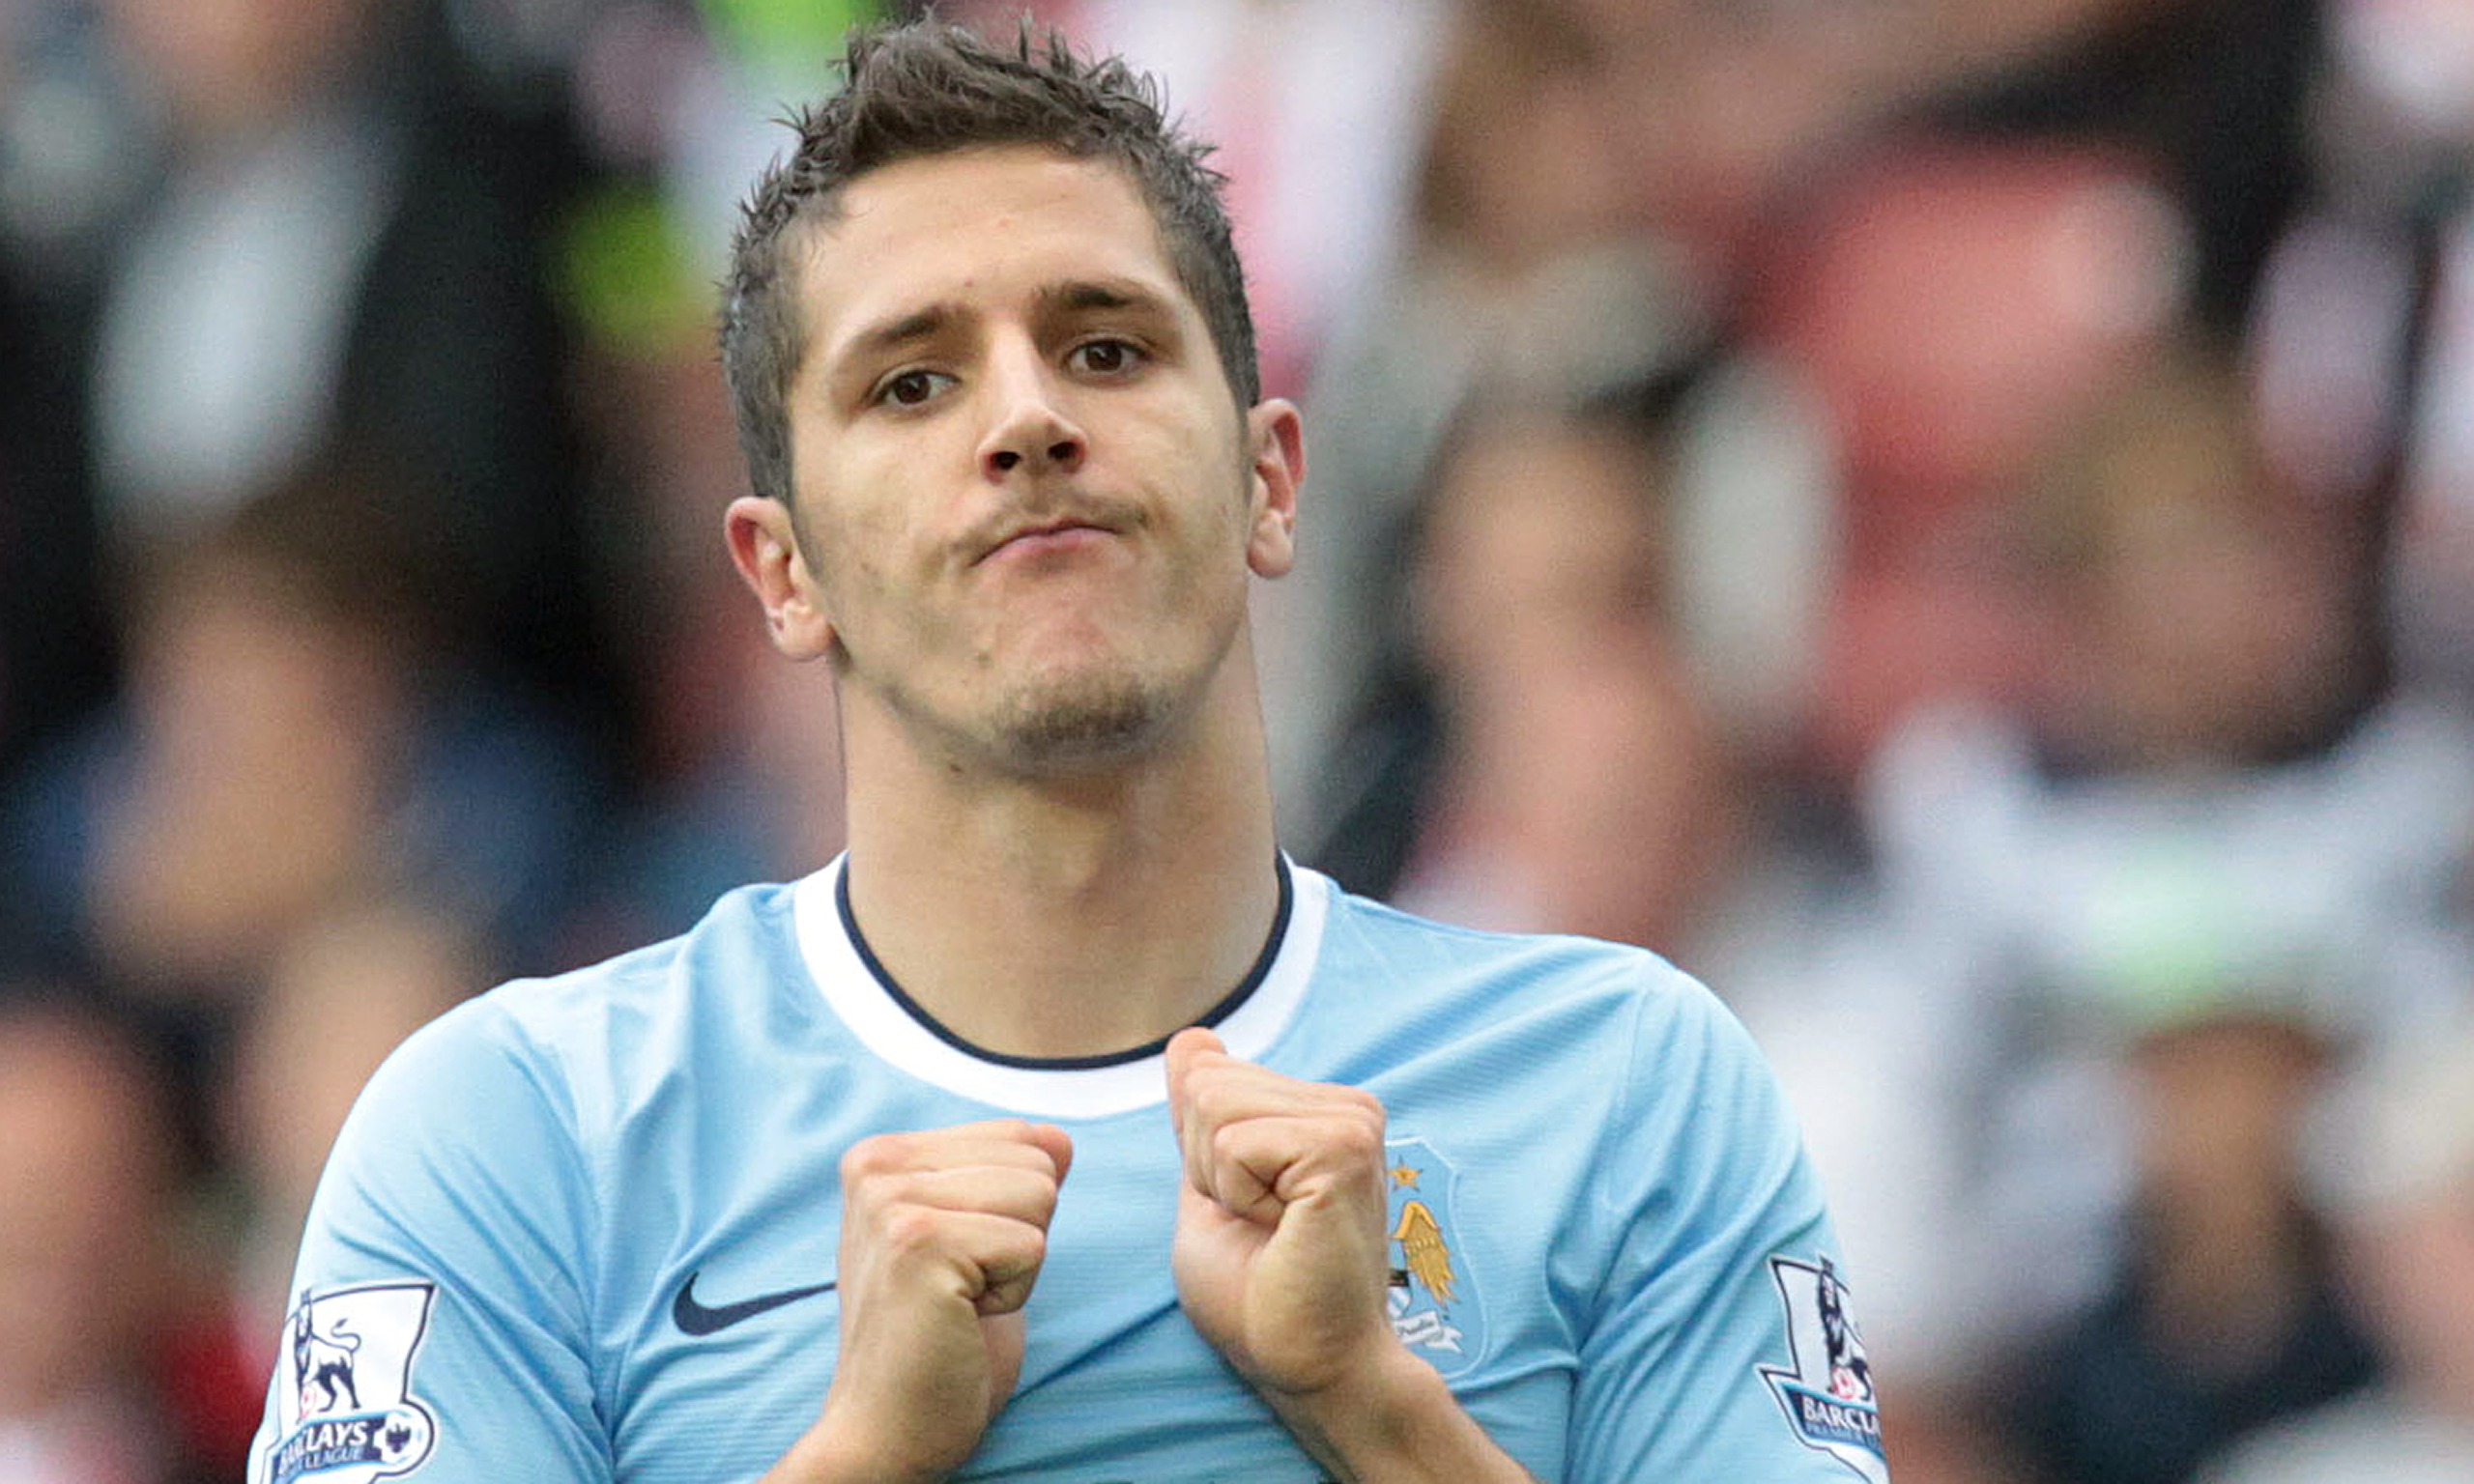 Pellegrini: “Many rumors, but Jovetic will stay at Manchester City”